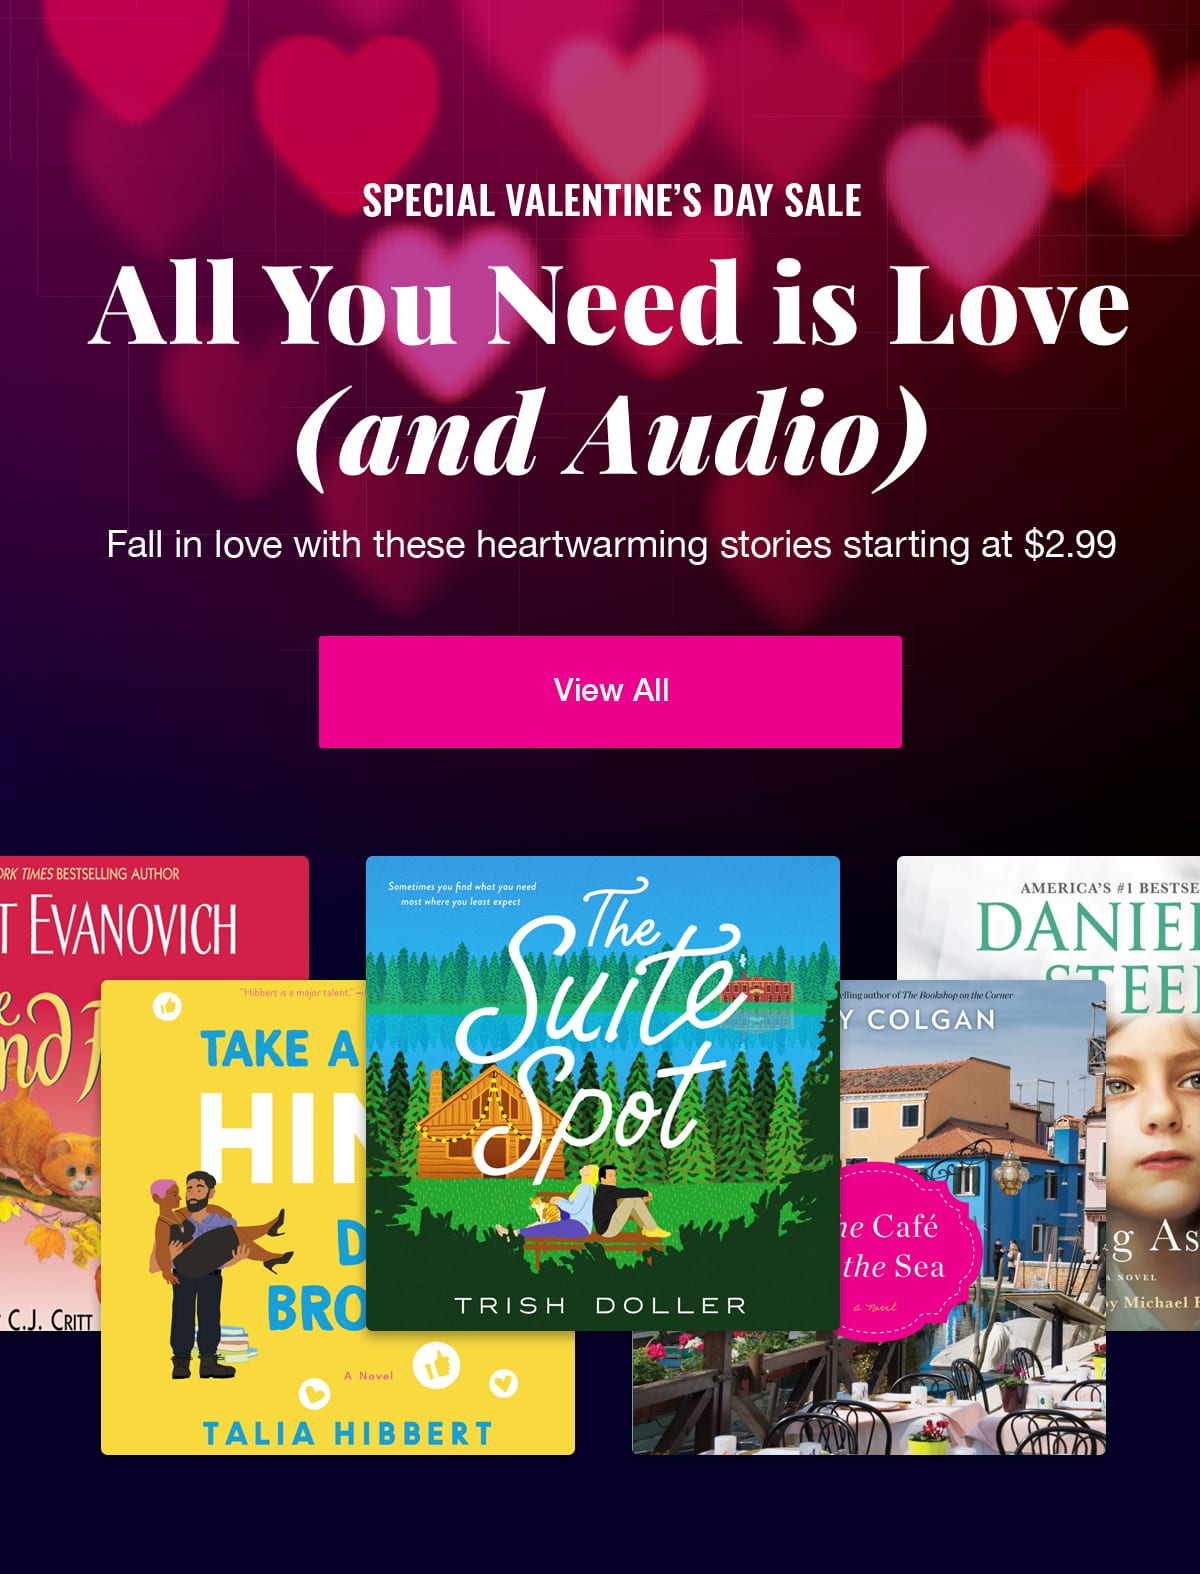 Special Valentine's Day Sale. All you need is love and audio. Fall in love with these heartwarming stories starting at $2.99. View all. 